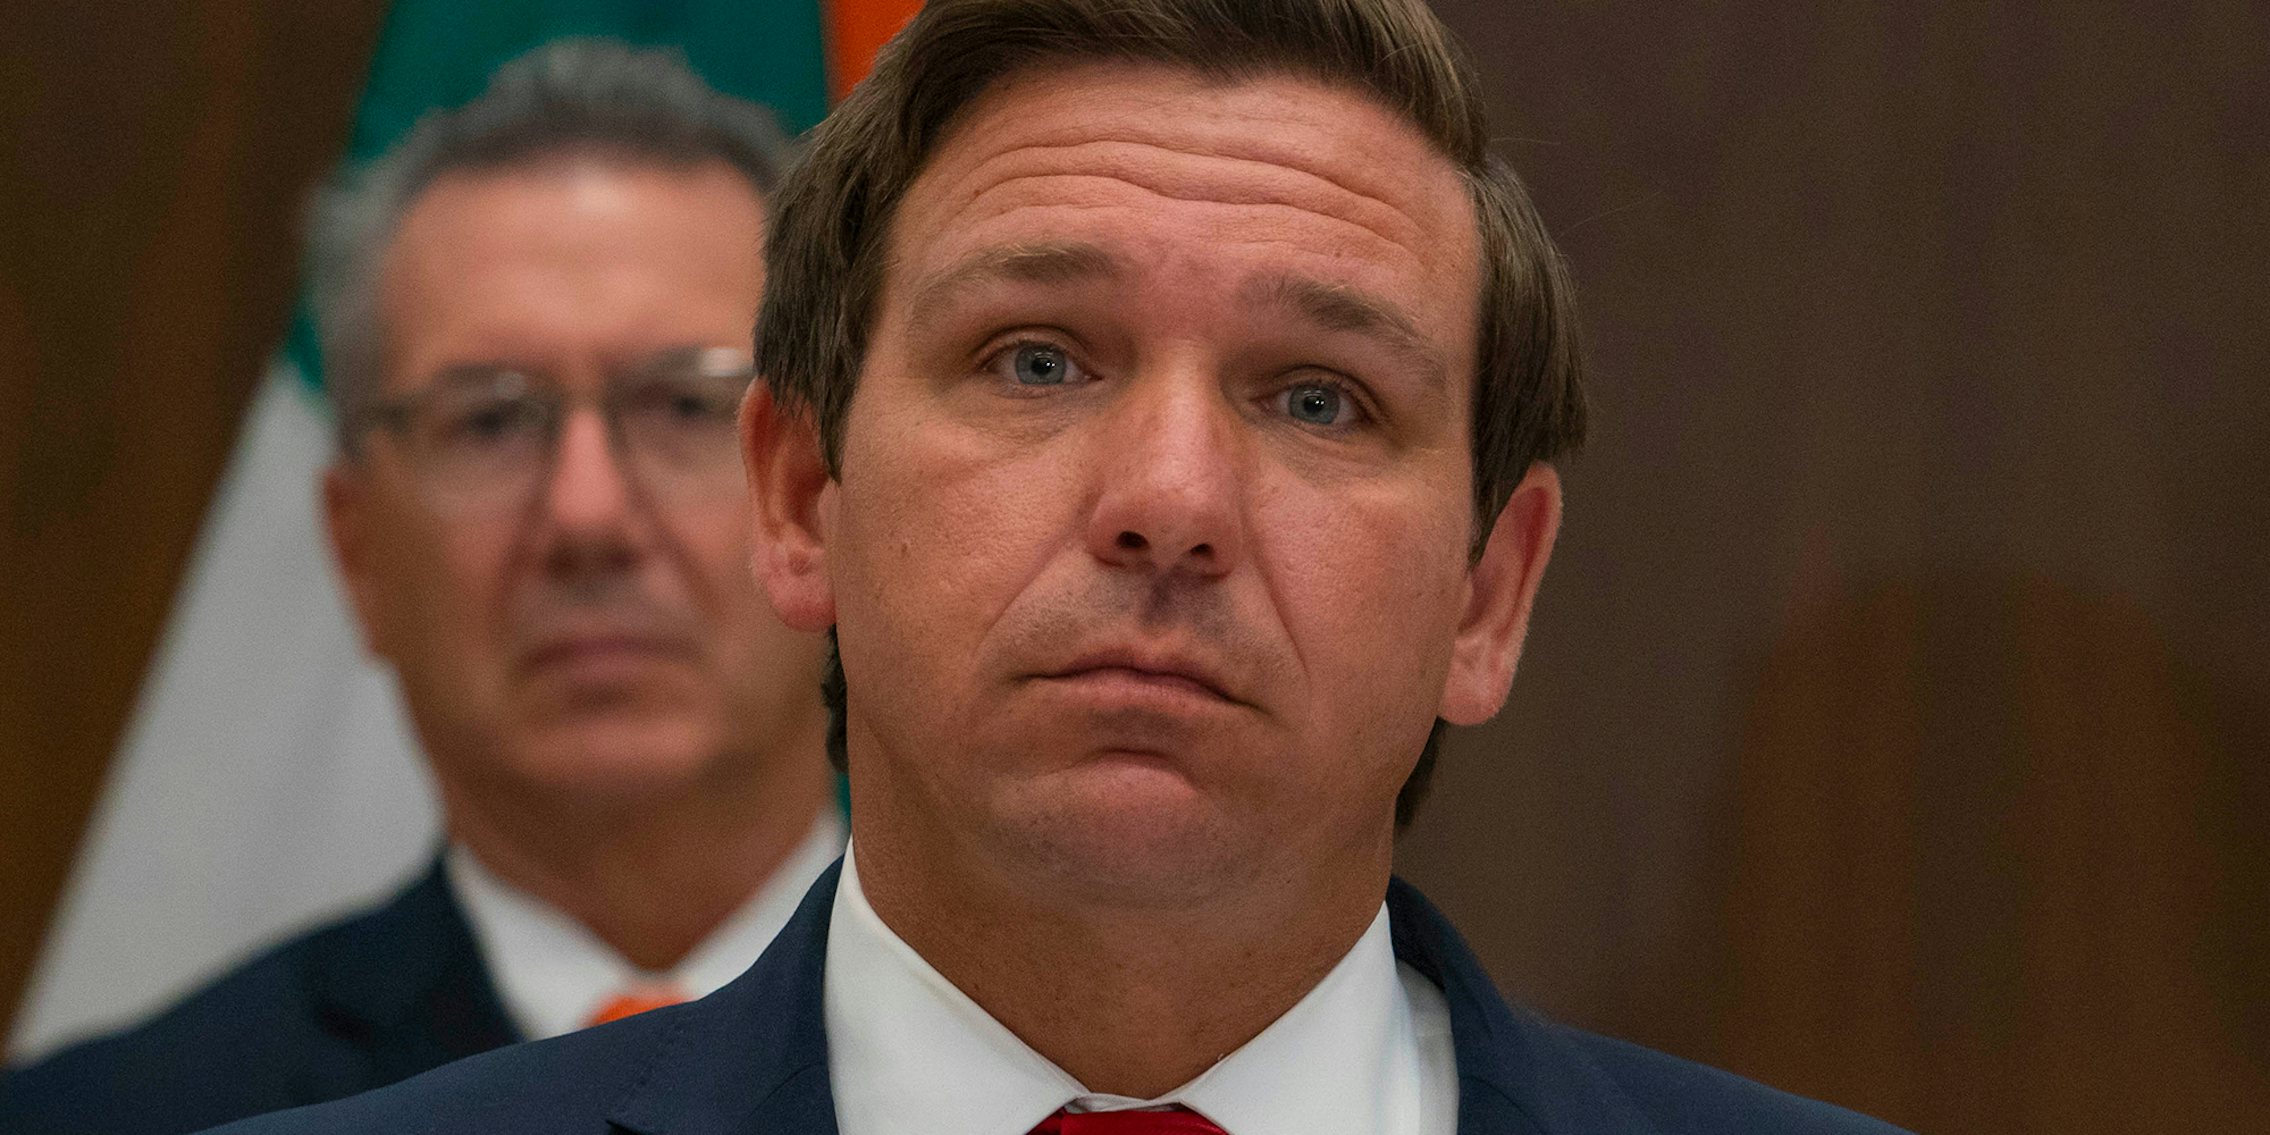 Florida Governor Ron DeSantis how tall is he